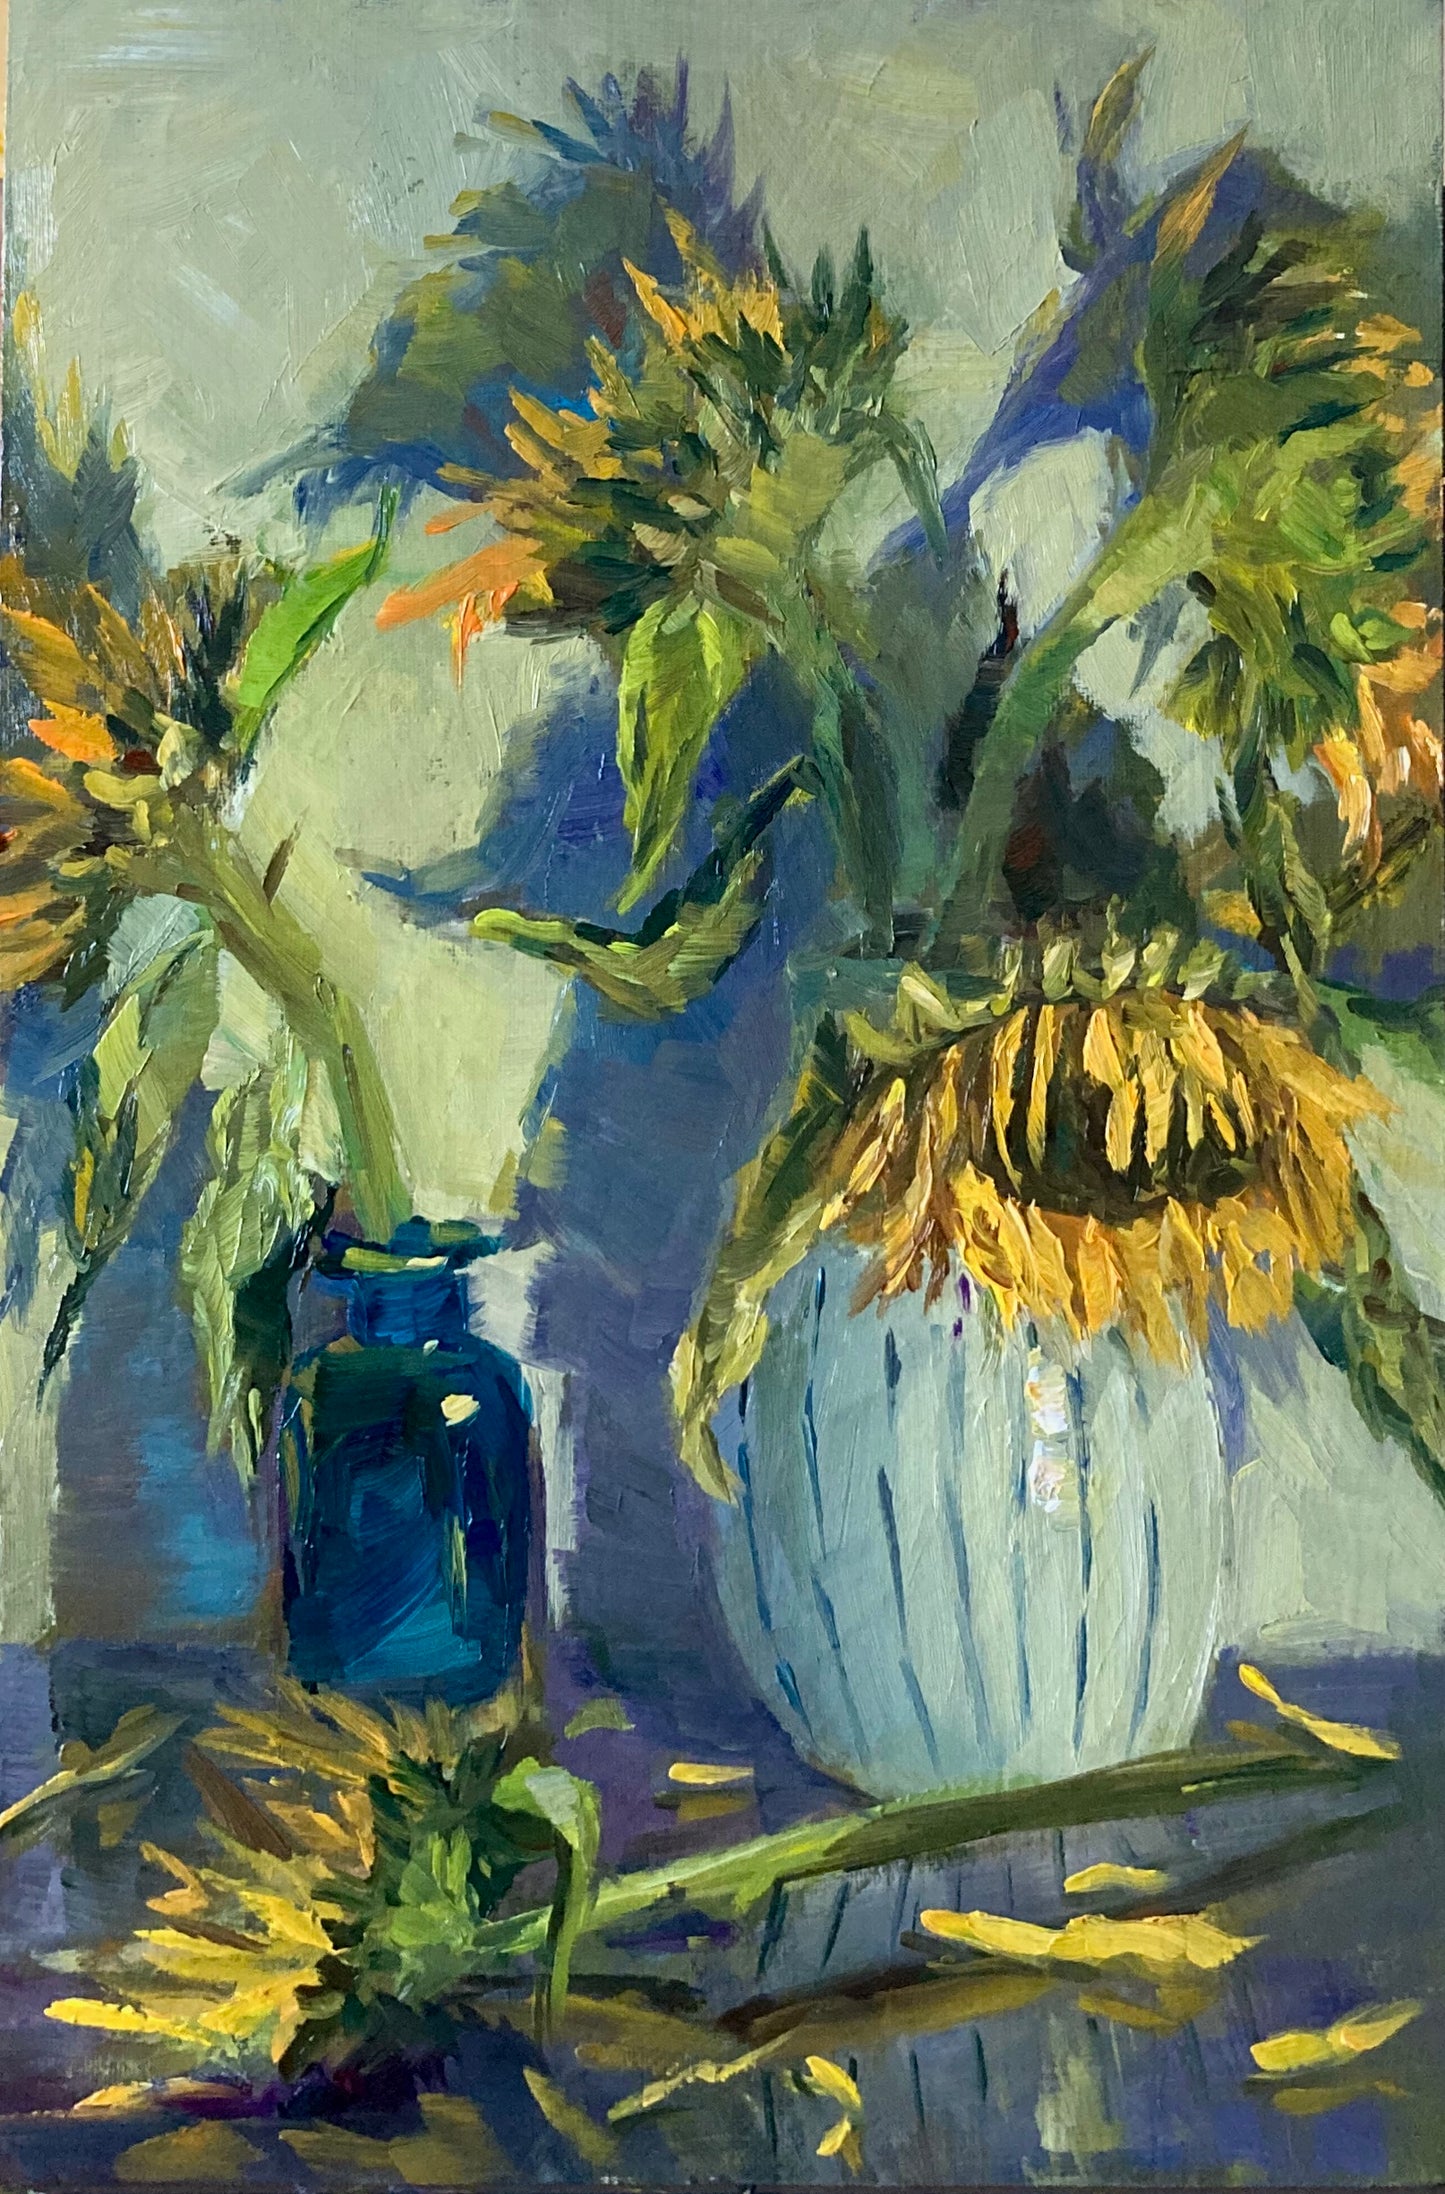 Sunflower Series 30 - Original Stilllife Painting, 8 by 12 inches